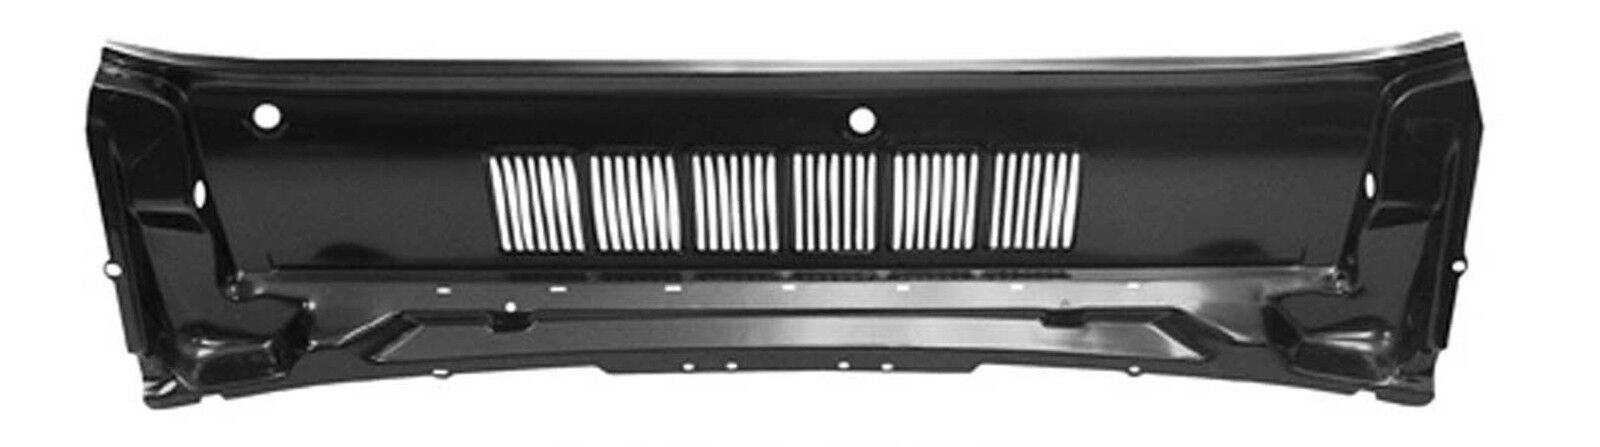 New 1964 - 1965 - 1966 Mustang Cowl Air Vent Upper Panel Grill at Hood 